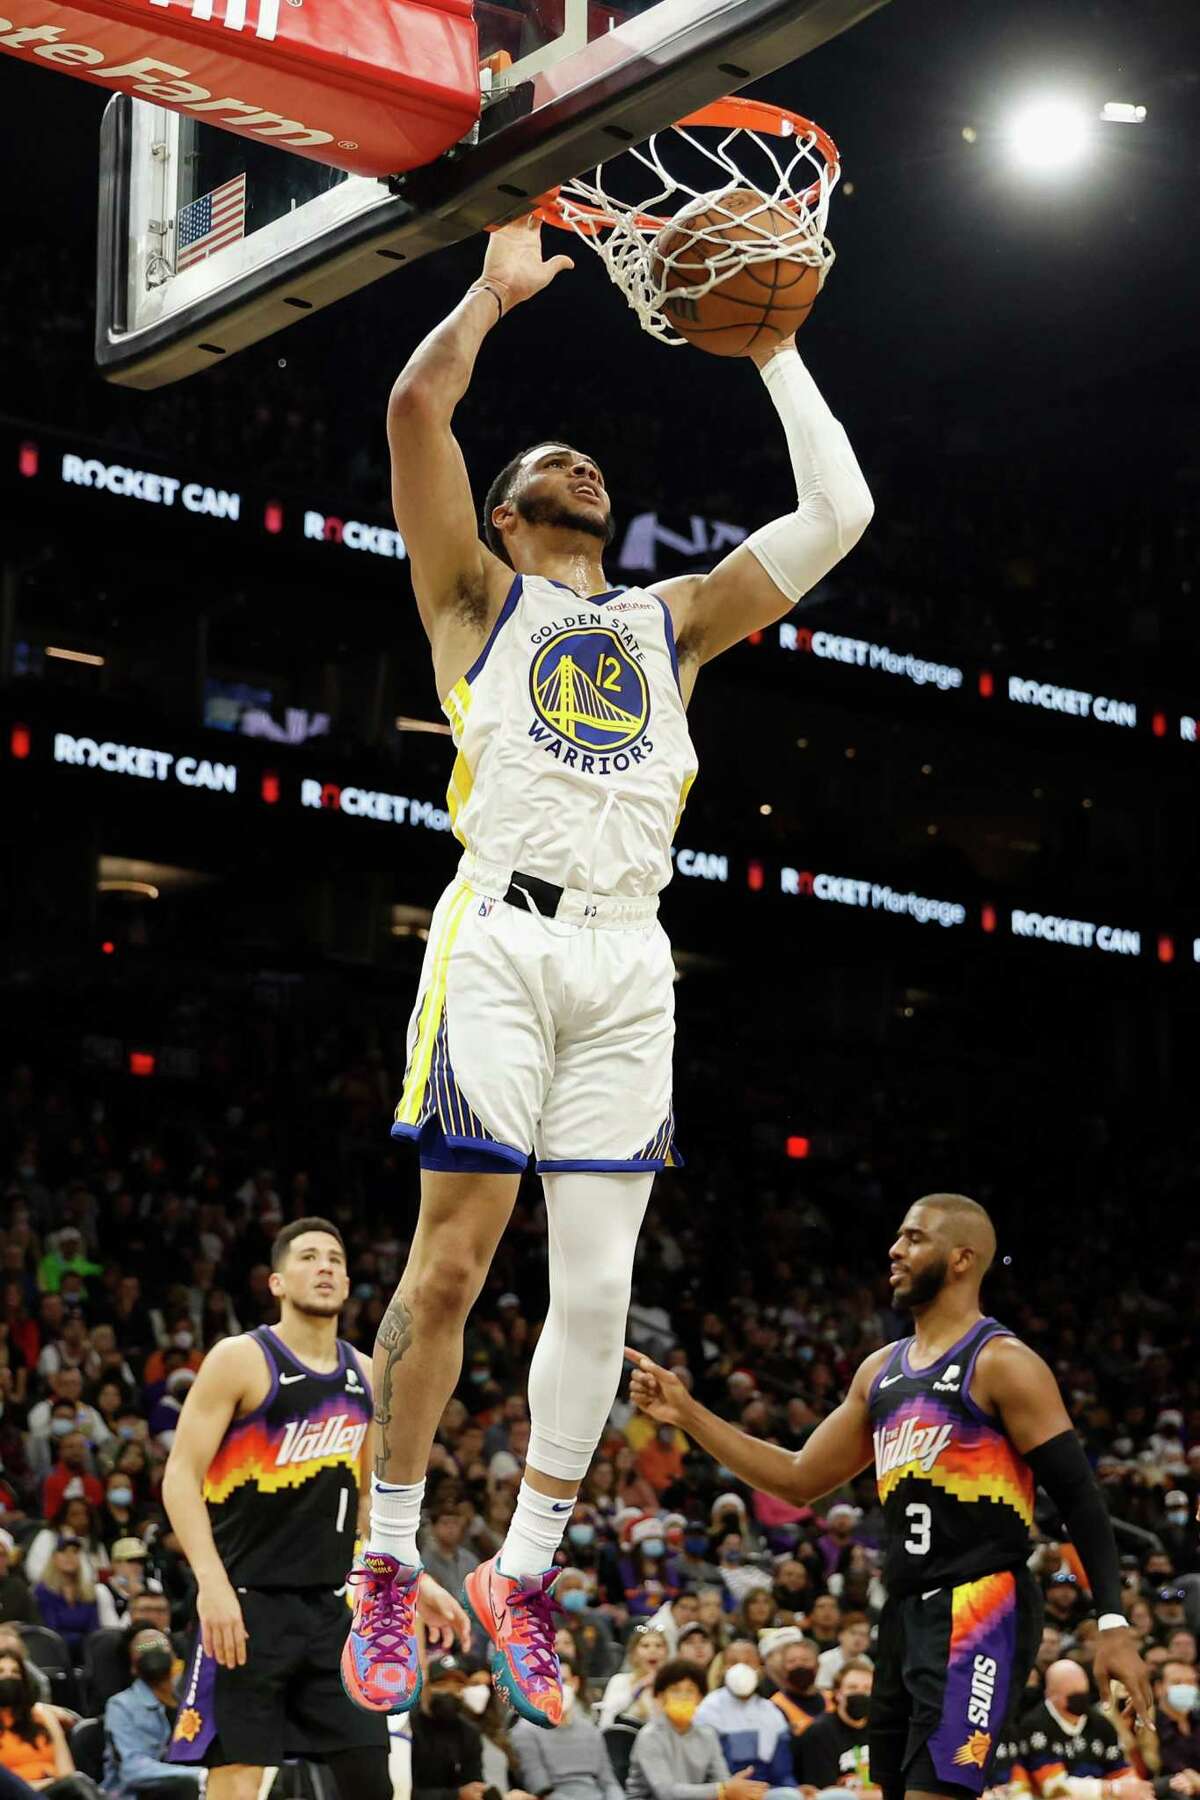 PHOENIX, ARIZONA - DECEMBER 25: Quinndary Weatherspoon #12 of the Golden State Warriors slam dunks the ball against the Phoenix Suns during the first half of NBA game at Footprint Center on December 25, 2021 in Phoenix, Arizona. The Warriors defeated the Suns 116-107. NOTE TO USER: User expressly acknowledges and agrees that, by downloading and or using this photograph, User is consenting to the terms and conditions of the Getty Images License Agreement. (Photo by Christian Petersen/Getty Images)